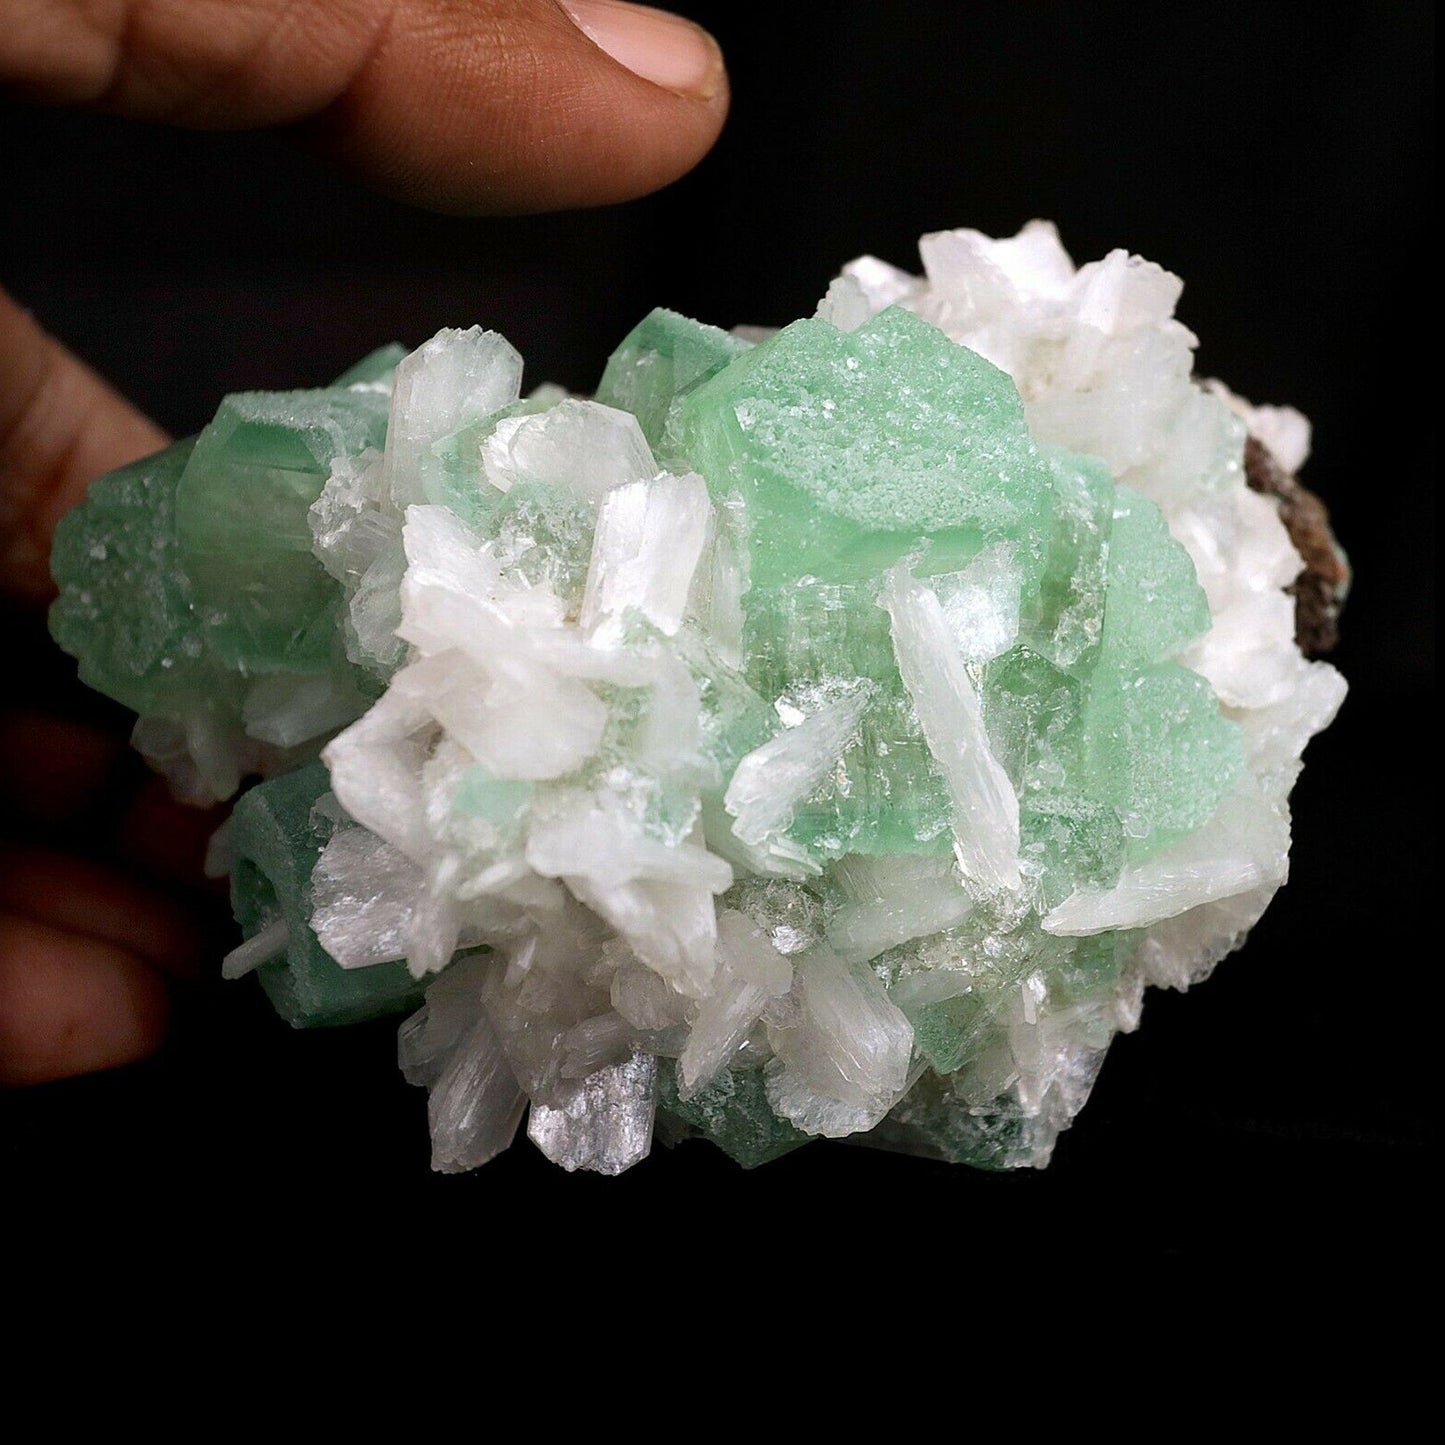 Green Apophyllite Crystal with Stilbite Natural Mineral Specimen # B 3…  https://www.superbminerals.us/products/apophyllite-green-crystal-with-stilbite-natural-mineral-specimen-b-3647  Features:Lovely Green Apophyllite Crystal Cluster Specimen with Stilbite from Aurangabad India. This unique specimen features a large green colored cubic formation Apophyllite with cream colored stilbite. This is a beautiful Zeolite specimen! Primary Mineral(s): ApophylliteSecondary Mineral(s): Stilbite